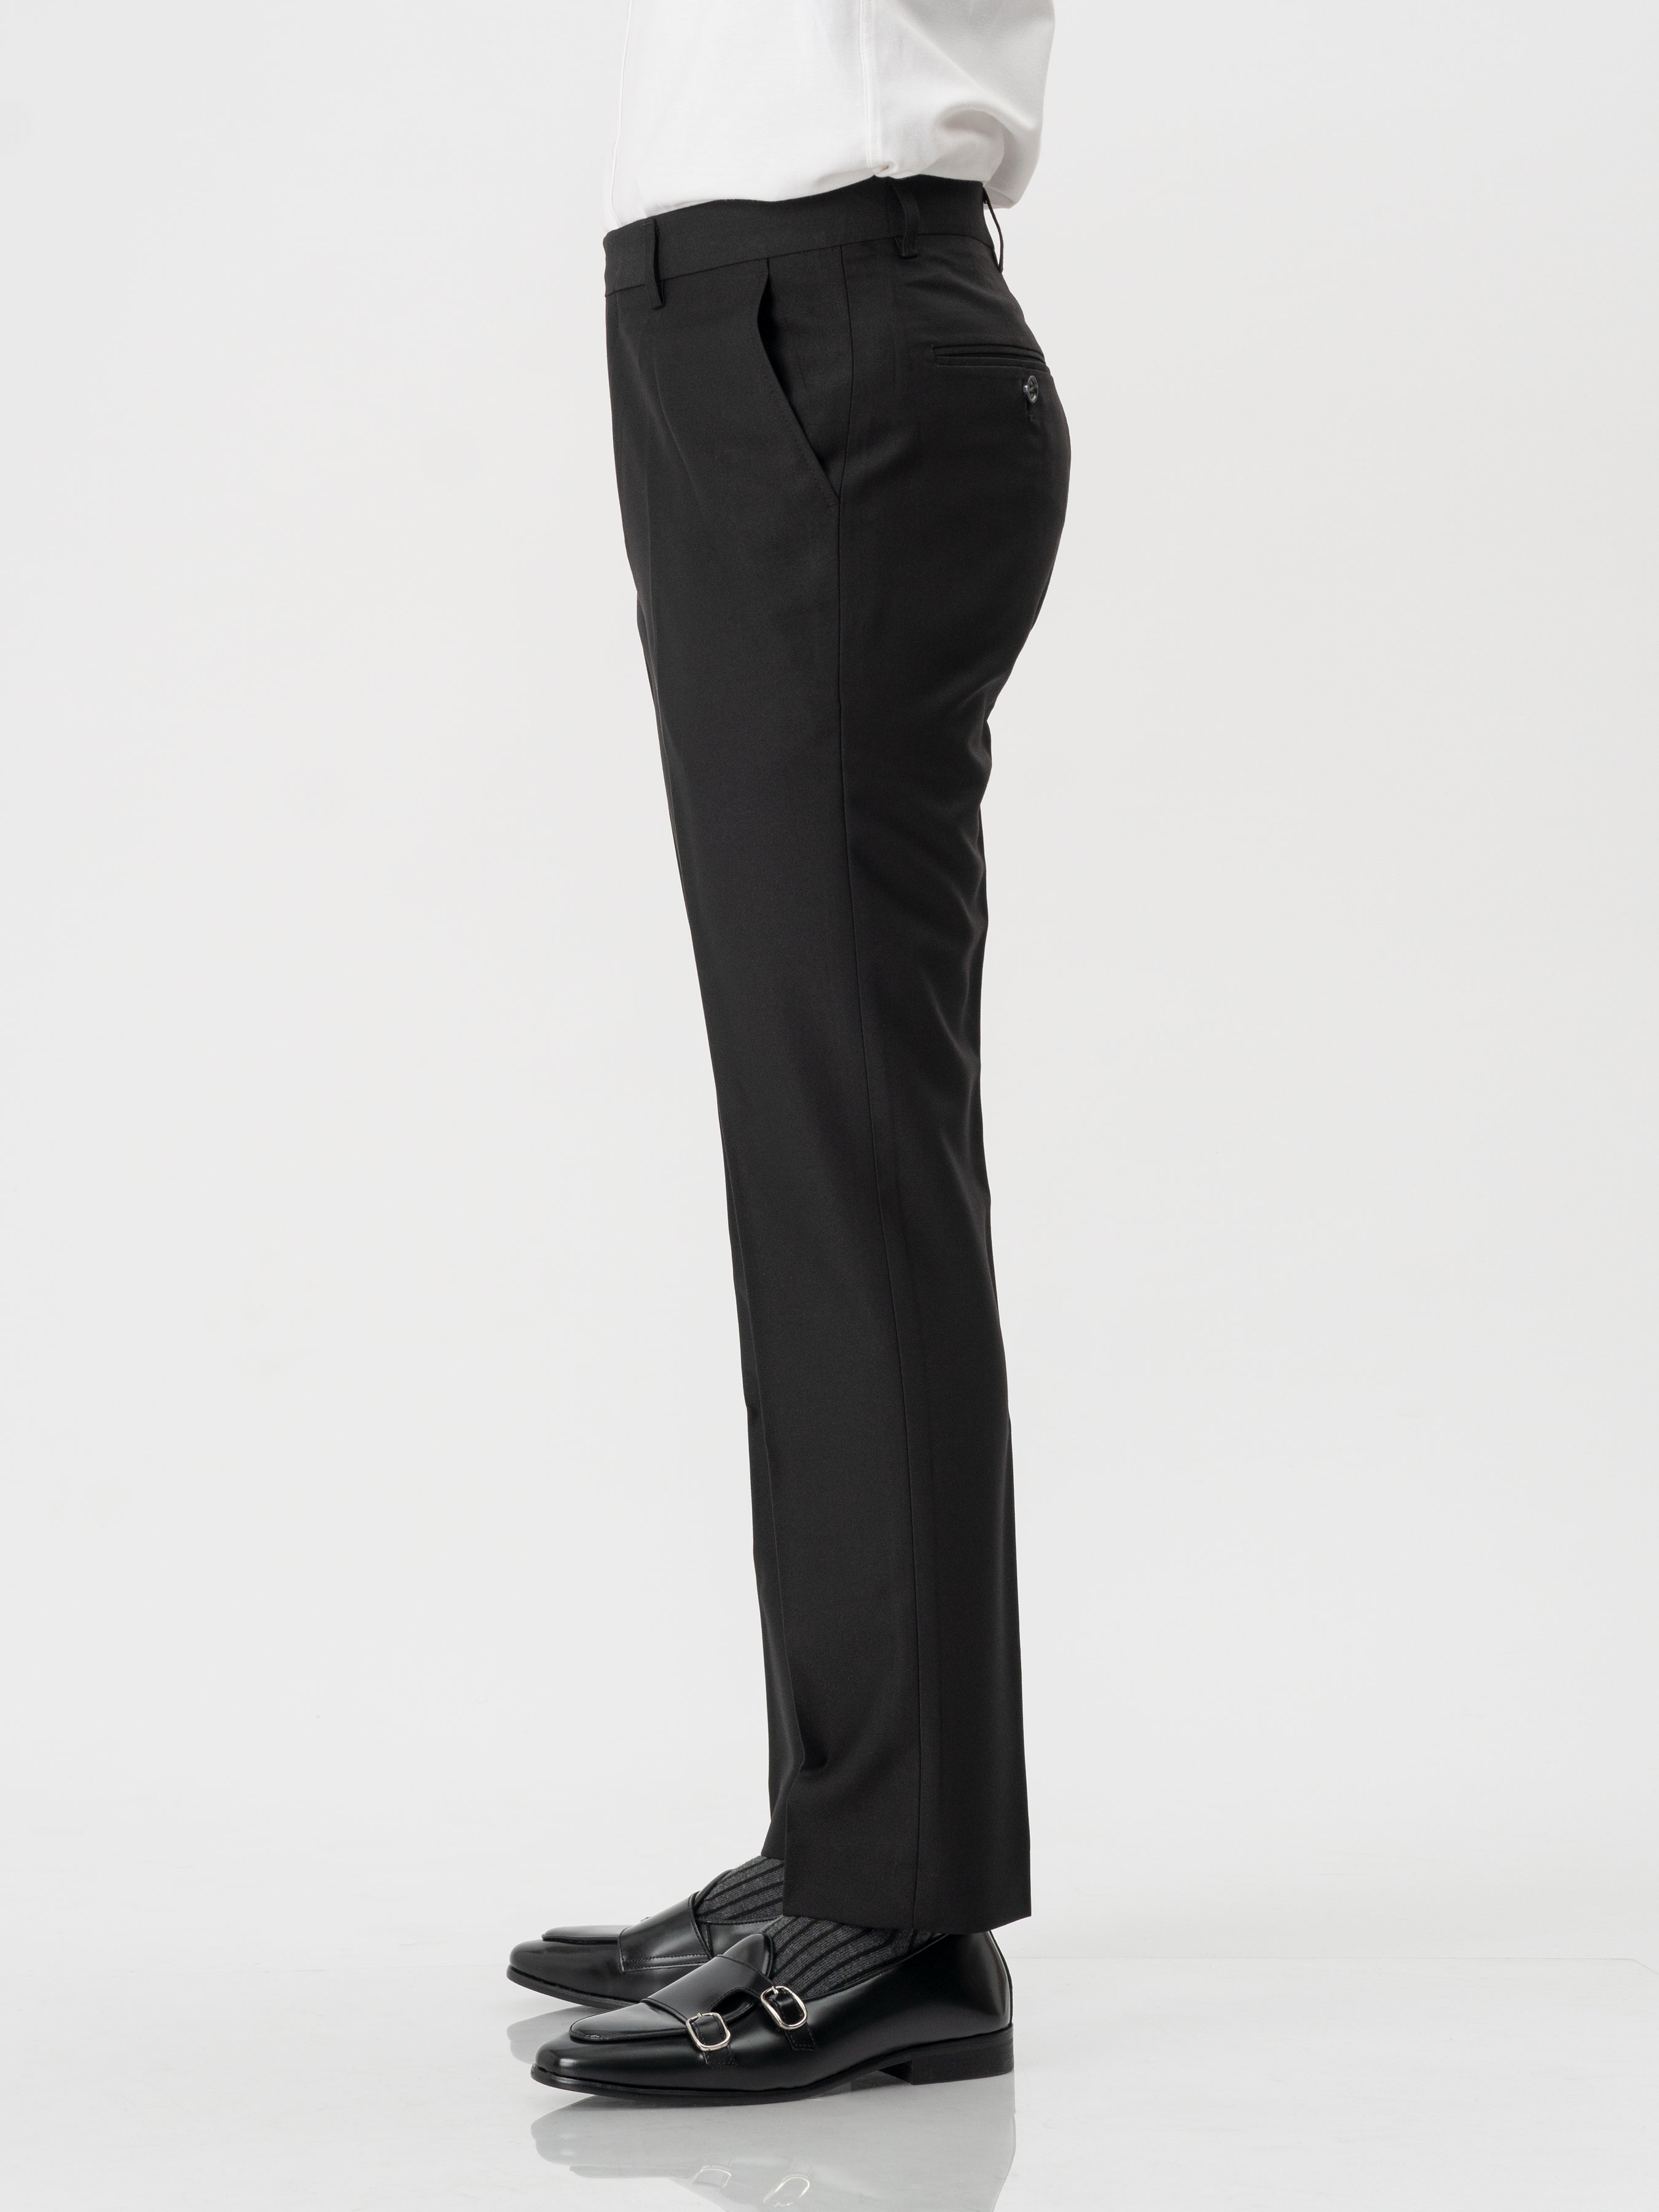 Trousers With Belt Loop - Tuxedo Black Plain (Stretchable)